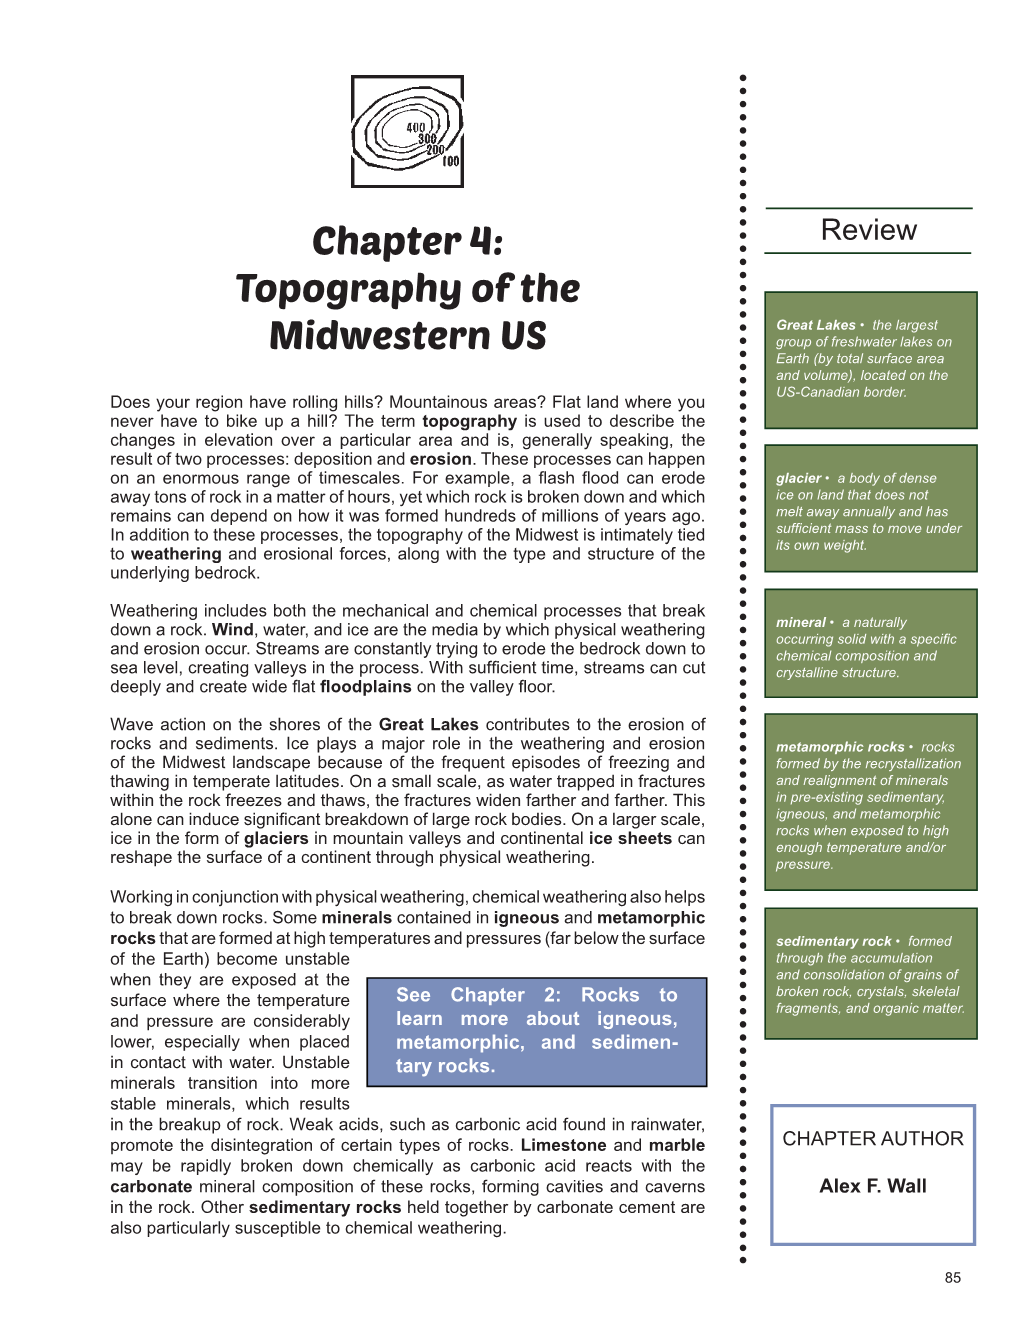 Chapter 4: Topography of the Midwestern US